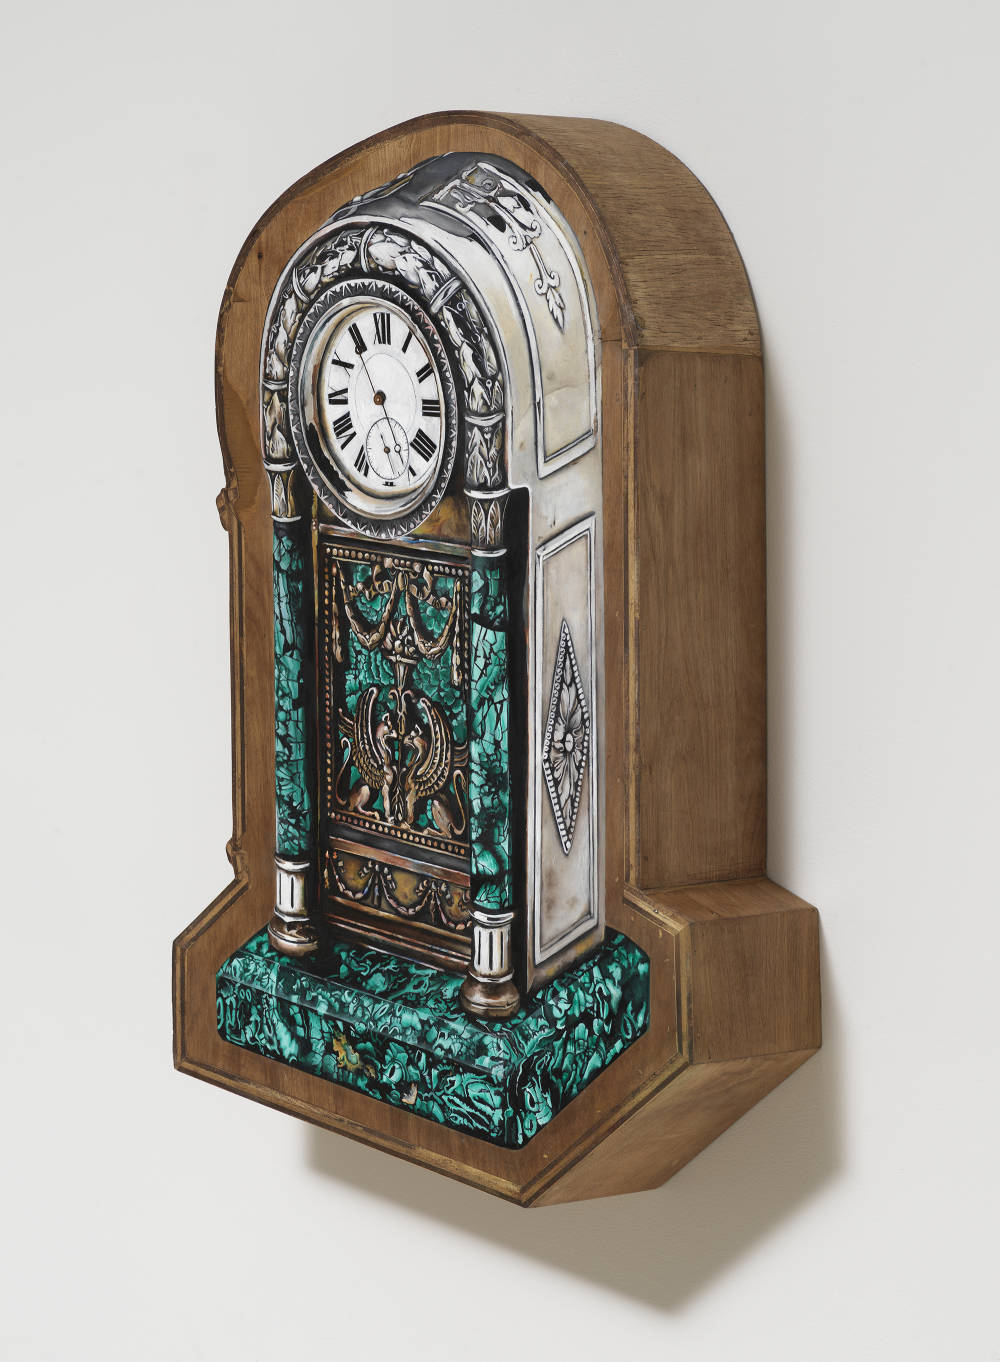 Image of an artwork by Libby Rothfeld of a shaped wooden panel with a very realistically rendered clock painted on the surface. The wood is stained brown and the clock is metallic with green marble.